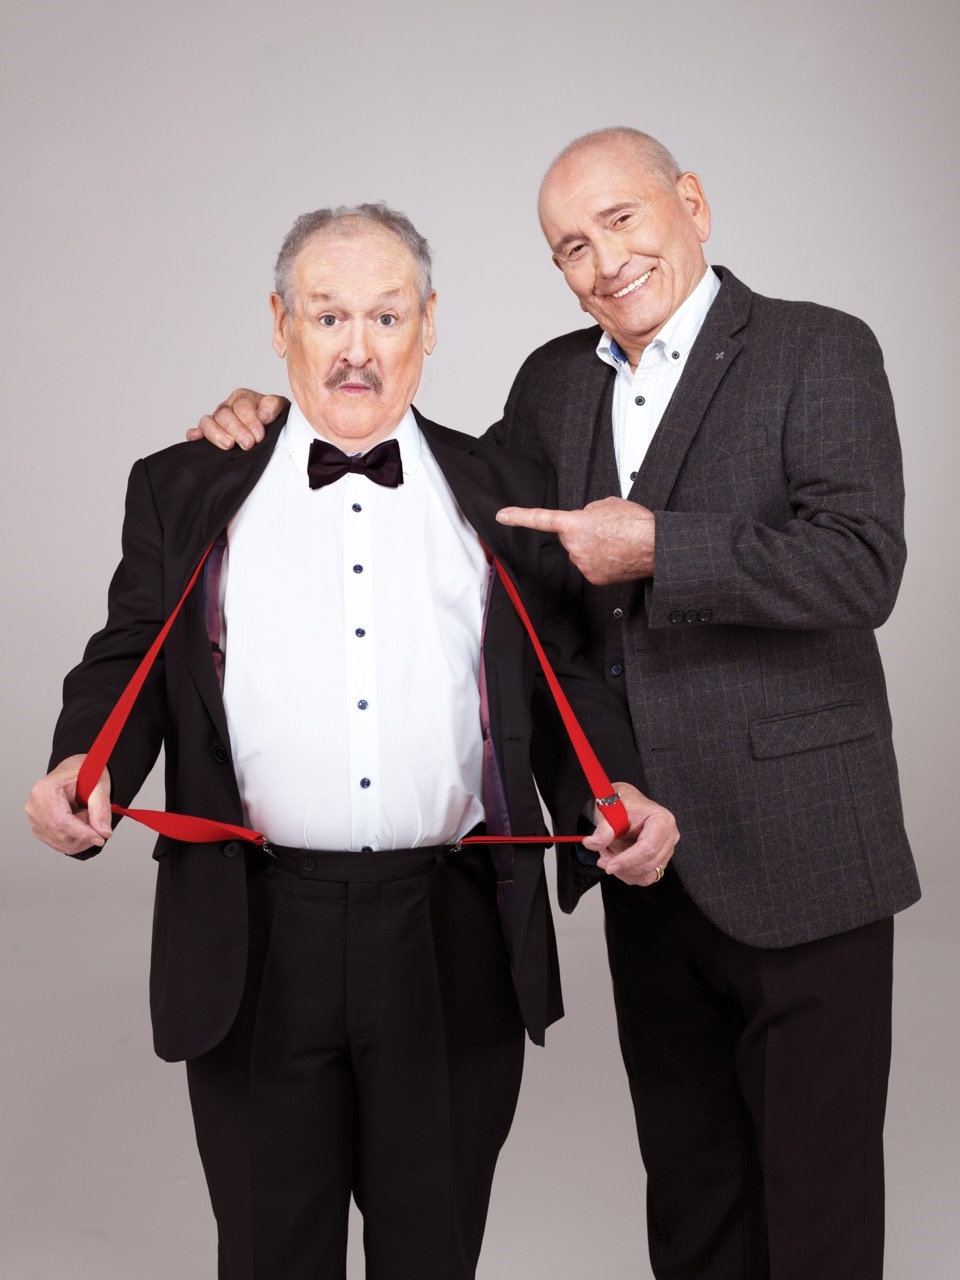 Comedy legends Cannon and Ball here in Halton -Rock on! 🗓